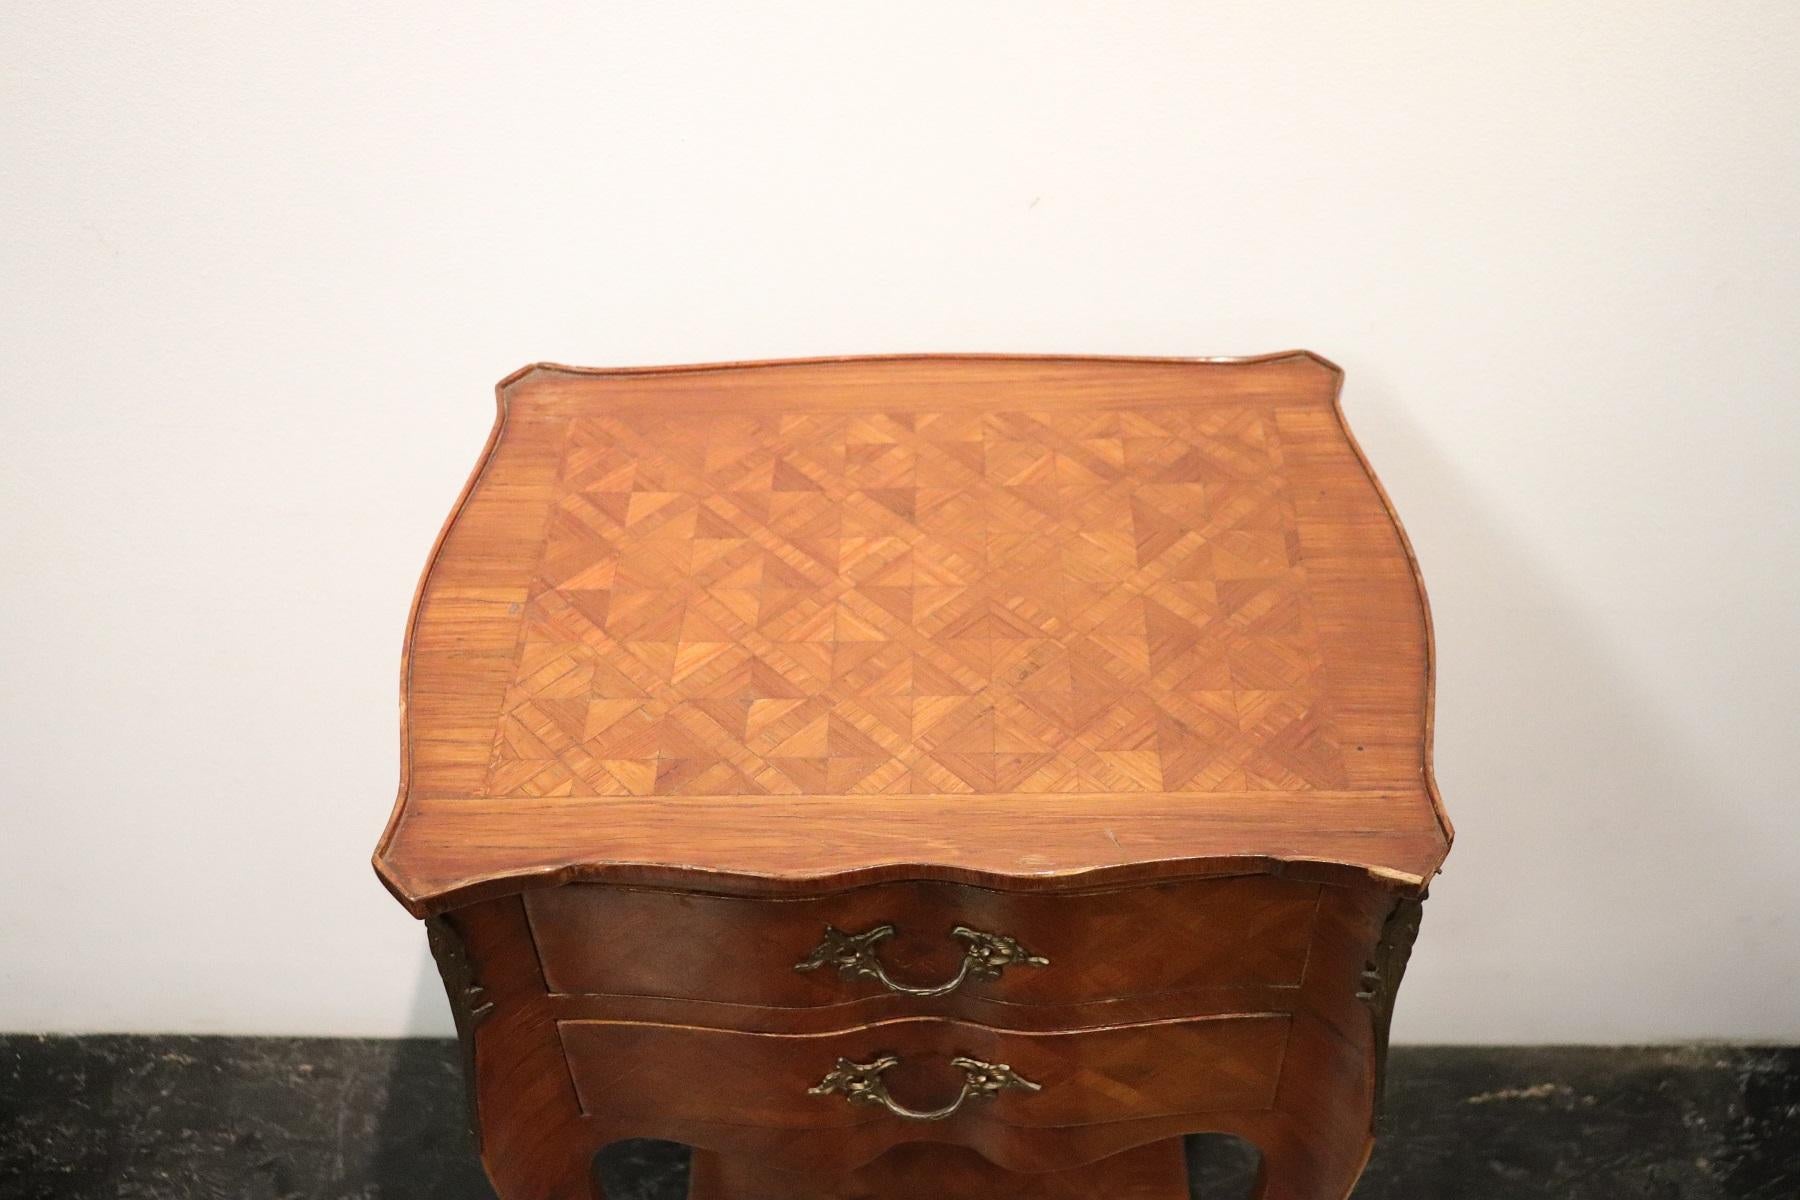 Rare and fine quality Italian Louis XV style, 1930s side table or nightstand table. The table has a particular legs slender. Fine inlay marquetry decoration in precious rosewood. On the front two comfortable little drawers. The finely chiselled